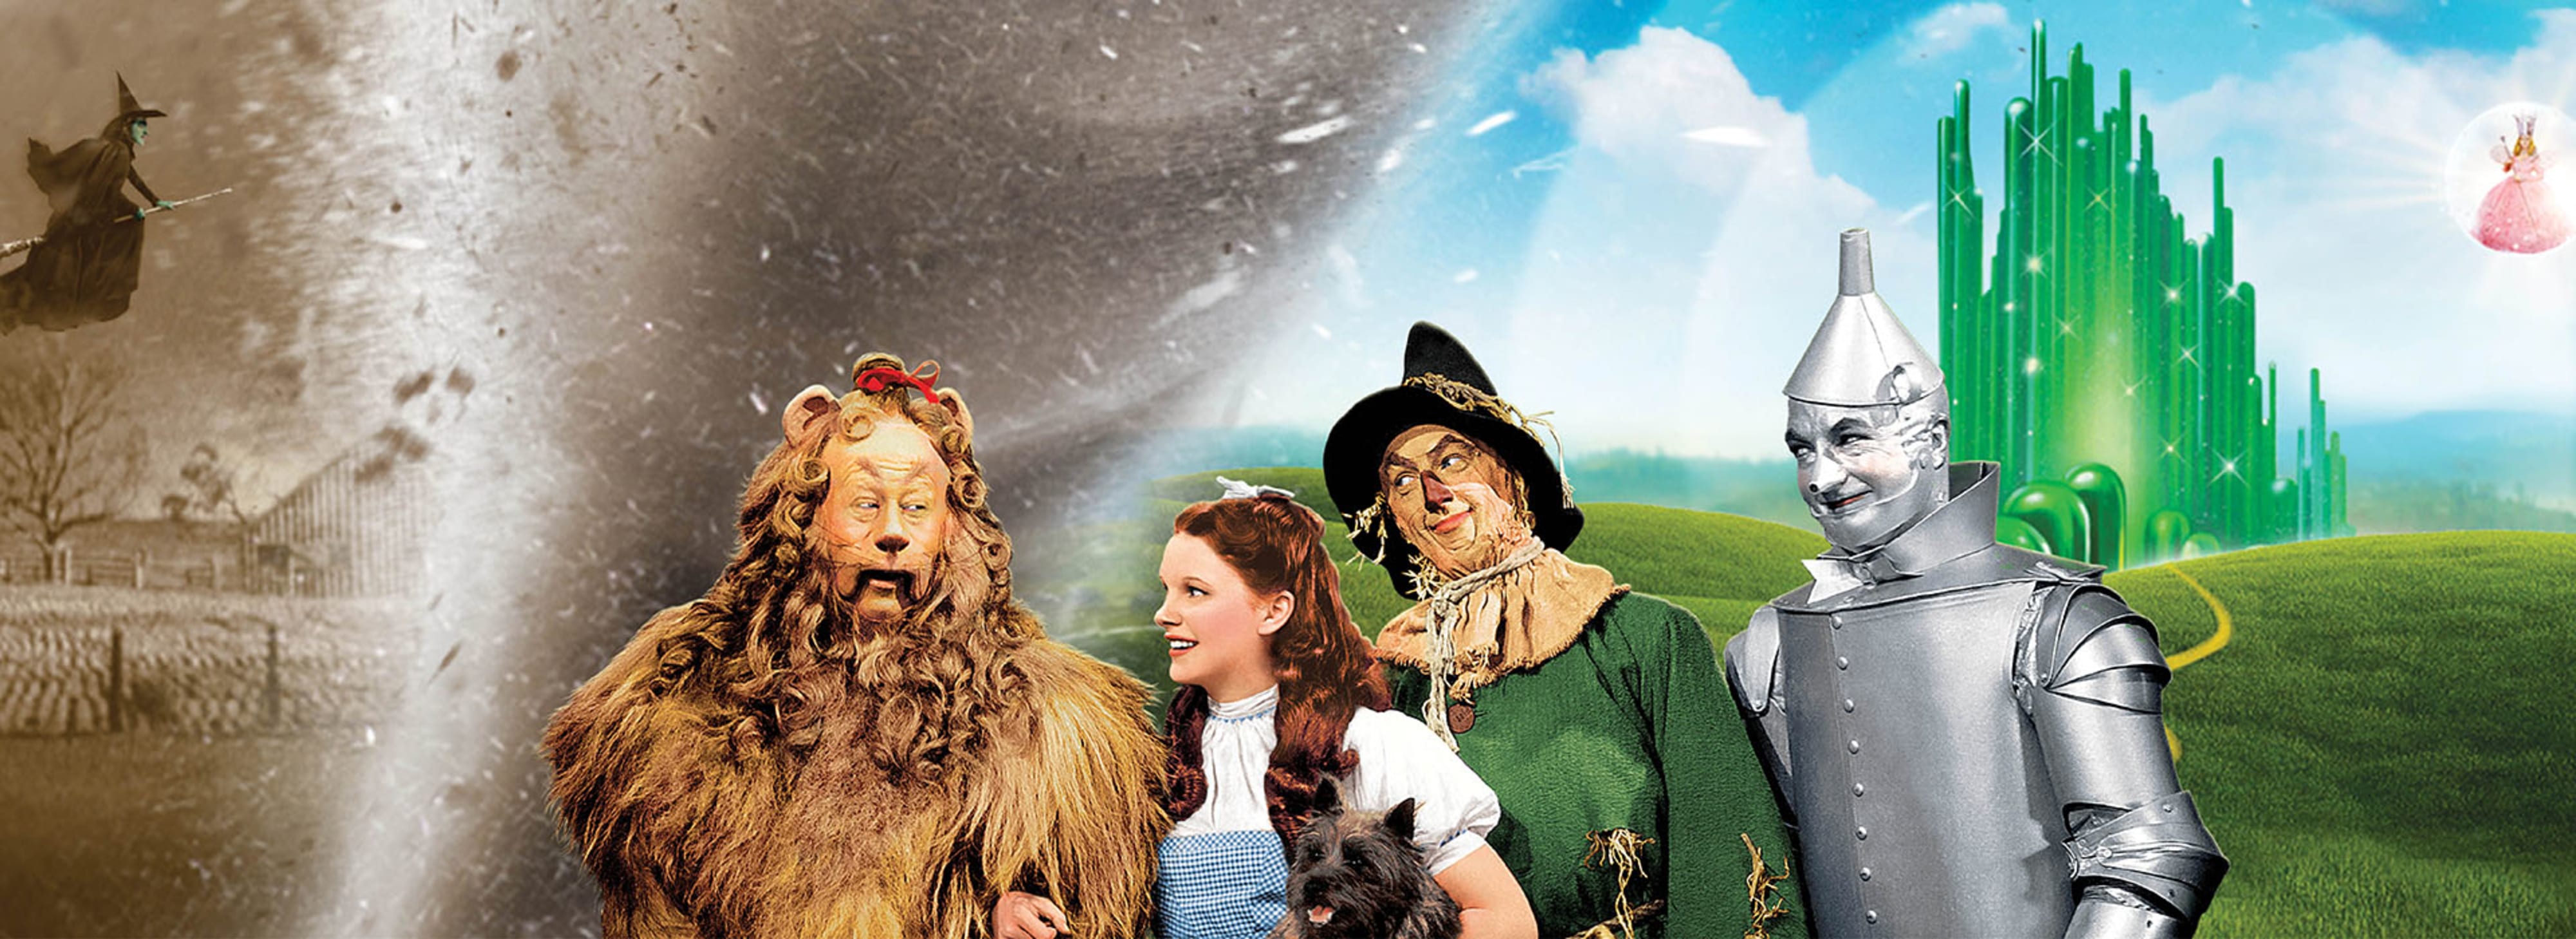 The Wizard of Oz' returning to theaters for Judy Garland's 100th